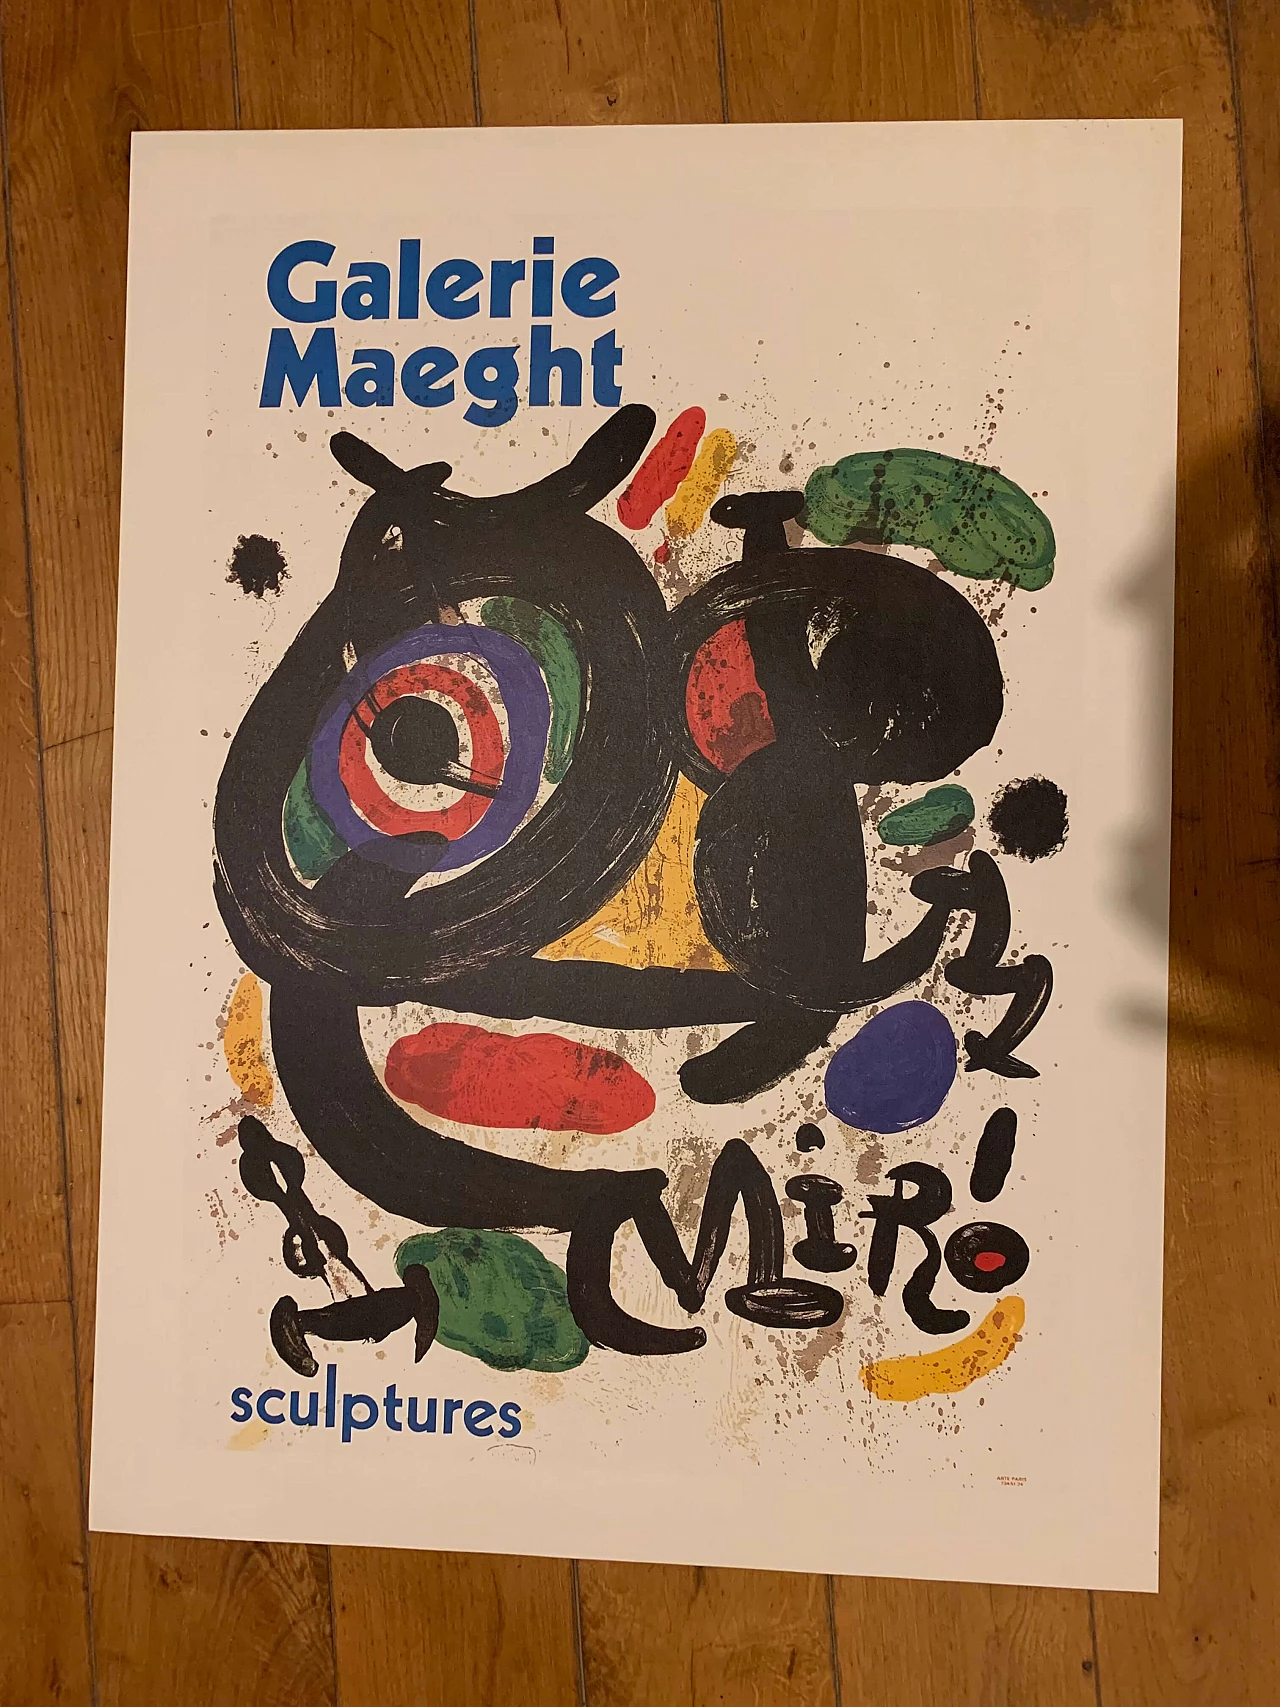 Poster for Joan Miró exhibition at the Galerie Maeght, 1970s 1